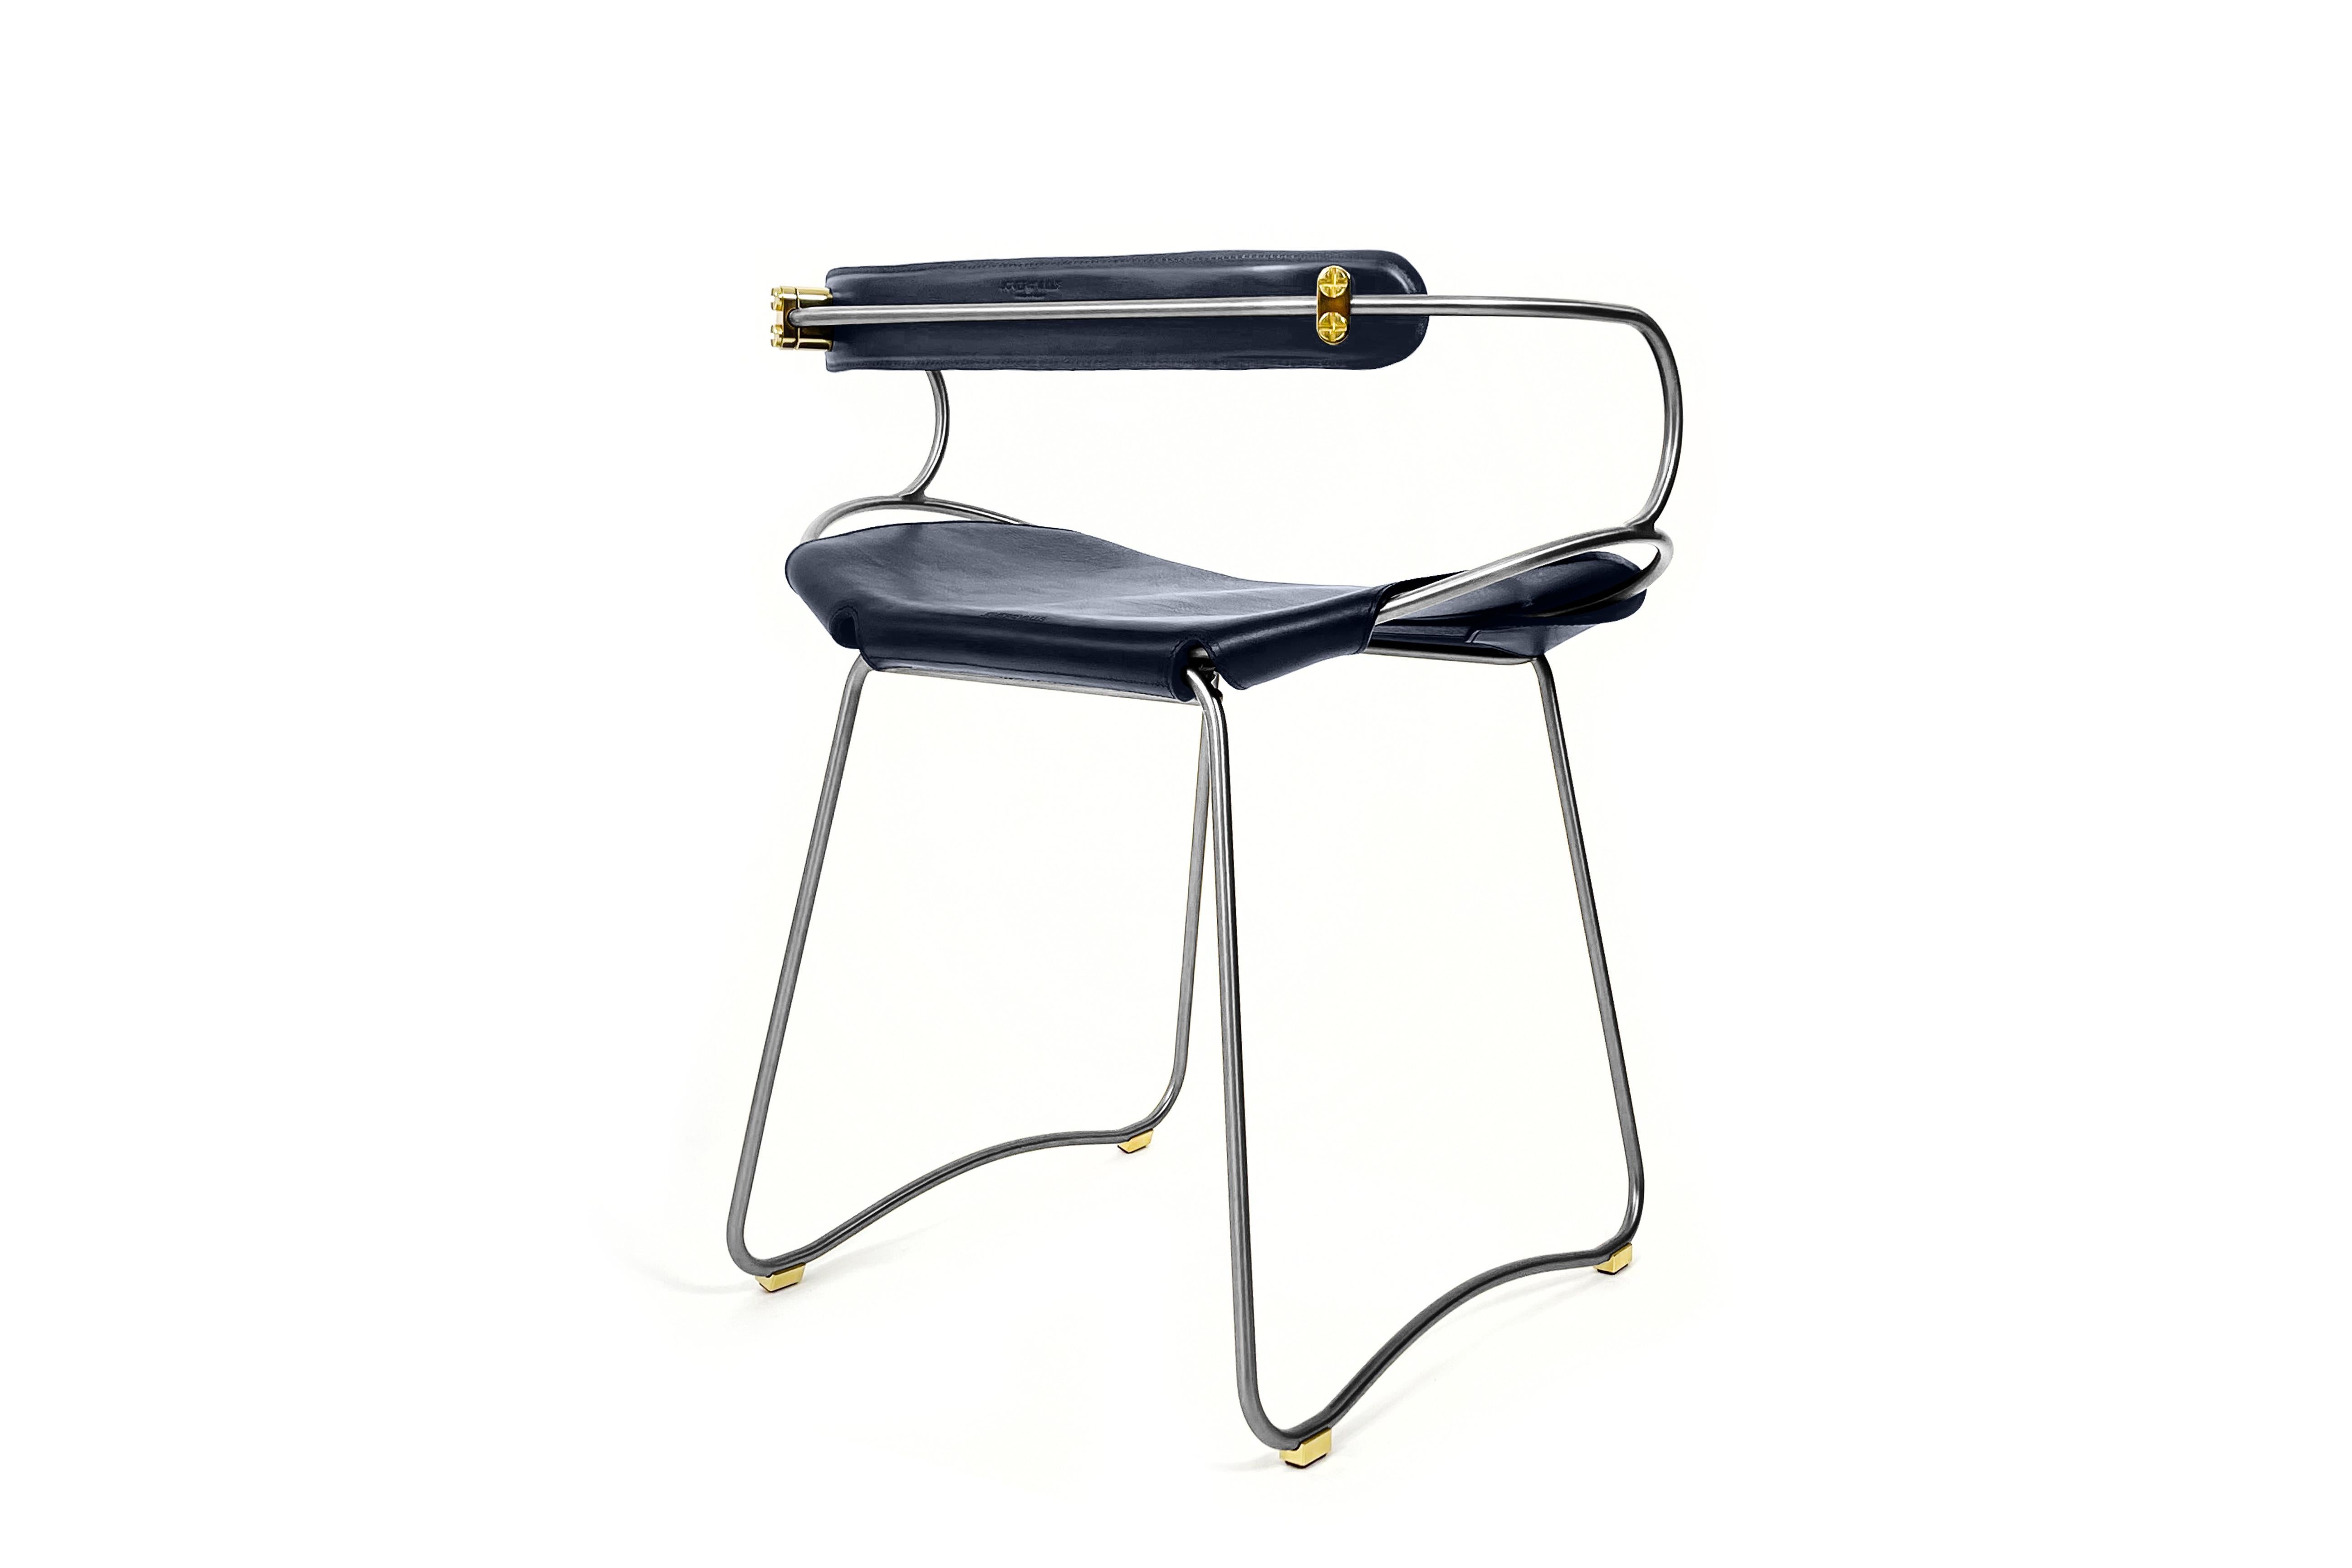 The Hug contemporary table stool with backrest is designed and conceived with a light aesthetic, the slight oscillation of the steel rod of 12 mm is complemented by the flexibility of the double 3.5 mm thick leather. When sitting in this furniture